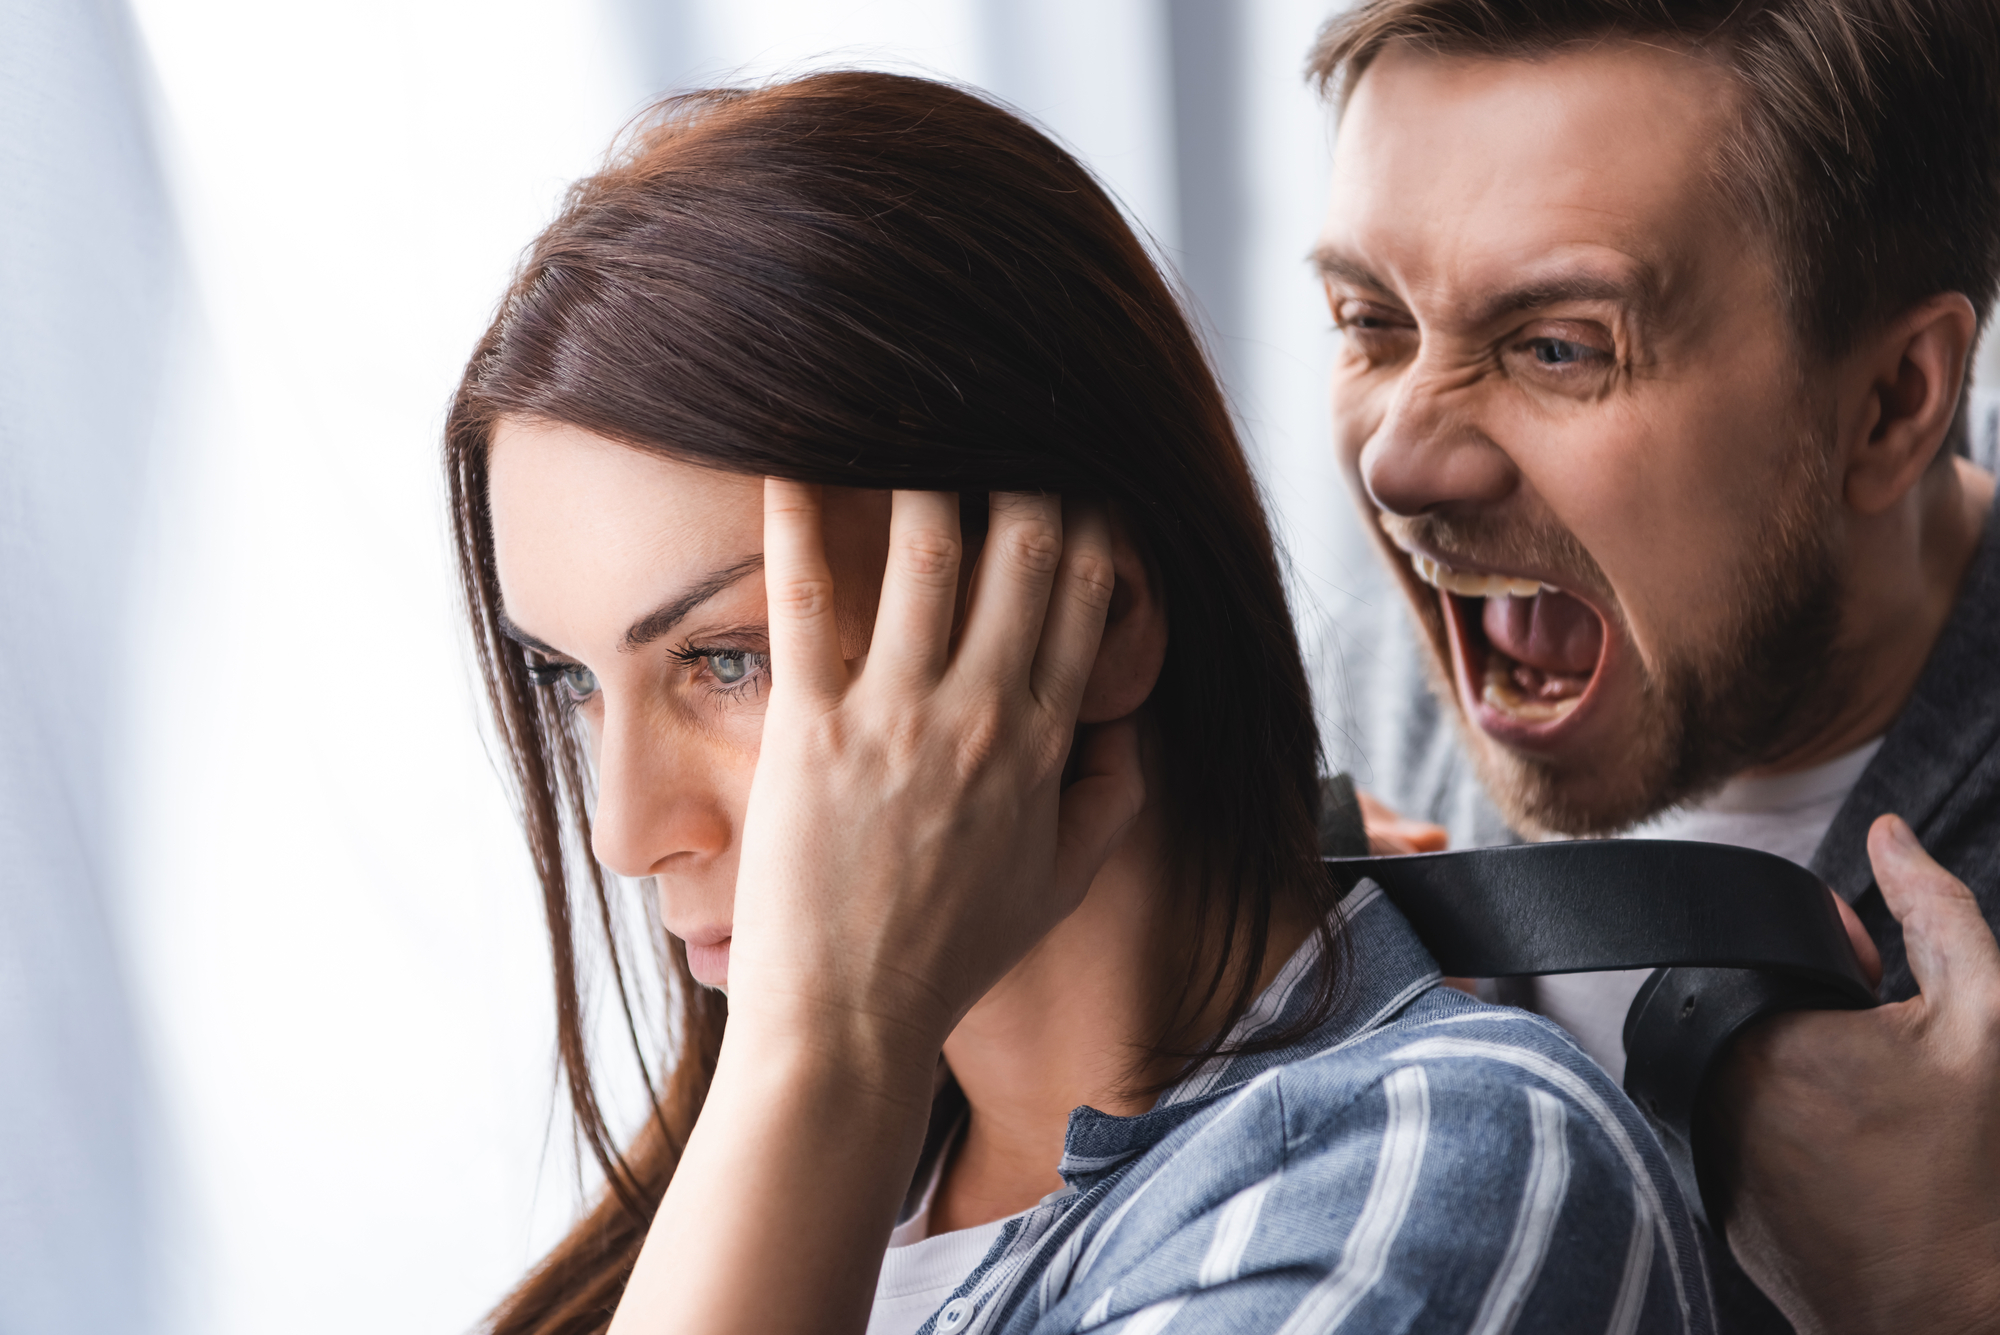 A close-up of a woman covering her ears with her hands, looking distressed and facing away. Behind her, a man is shouting aggressively, with his mouth wide open. Both are indoors with a neutral background. The scene conveys a sense of conflict and emotional distress.